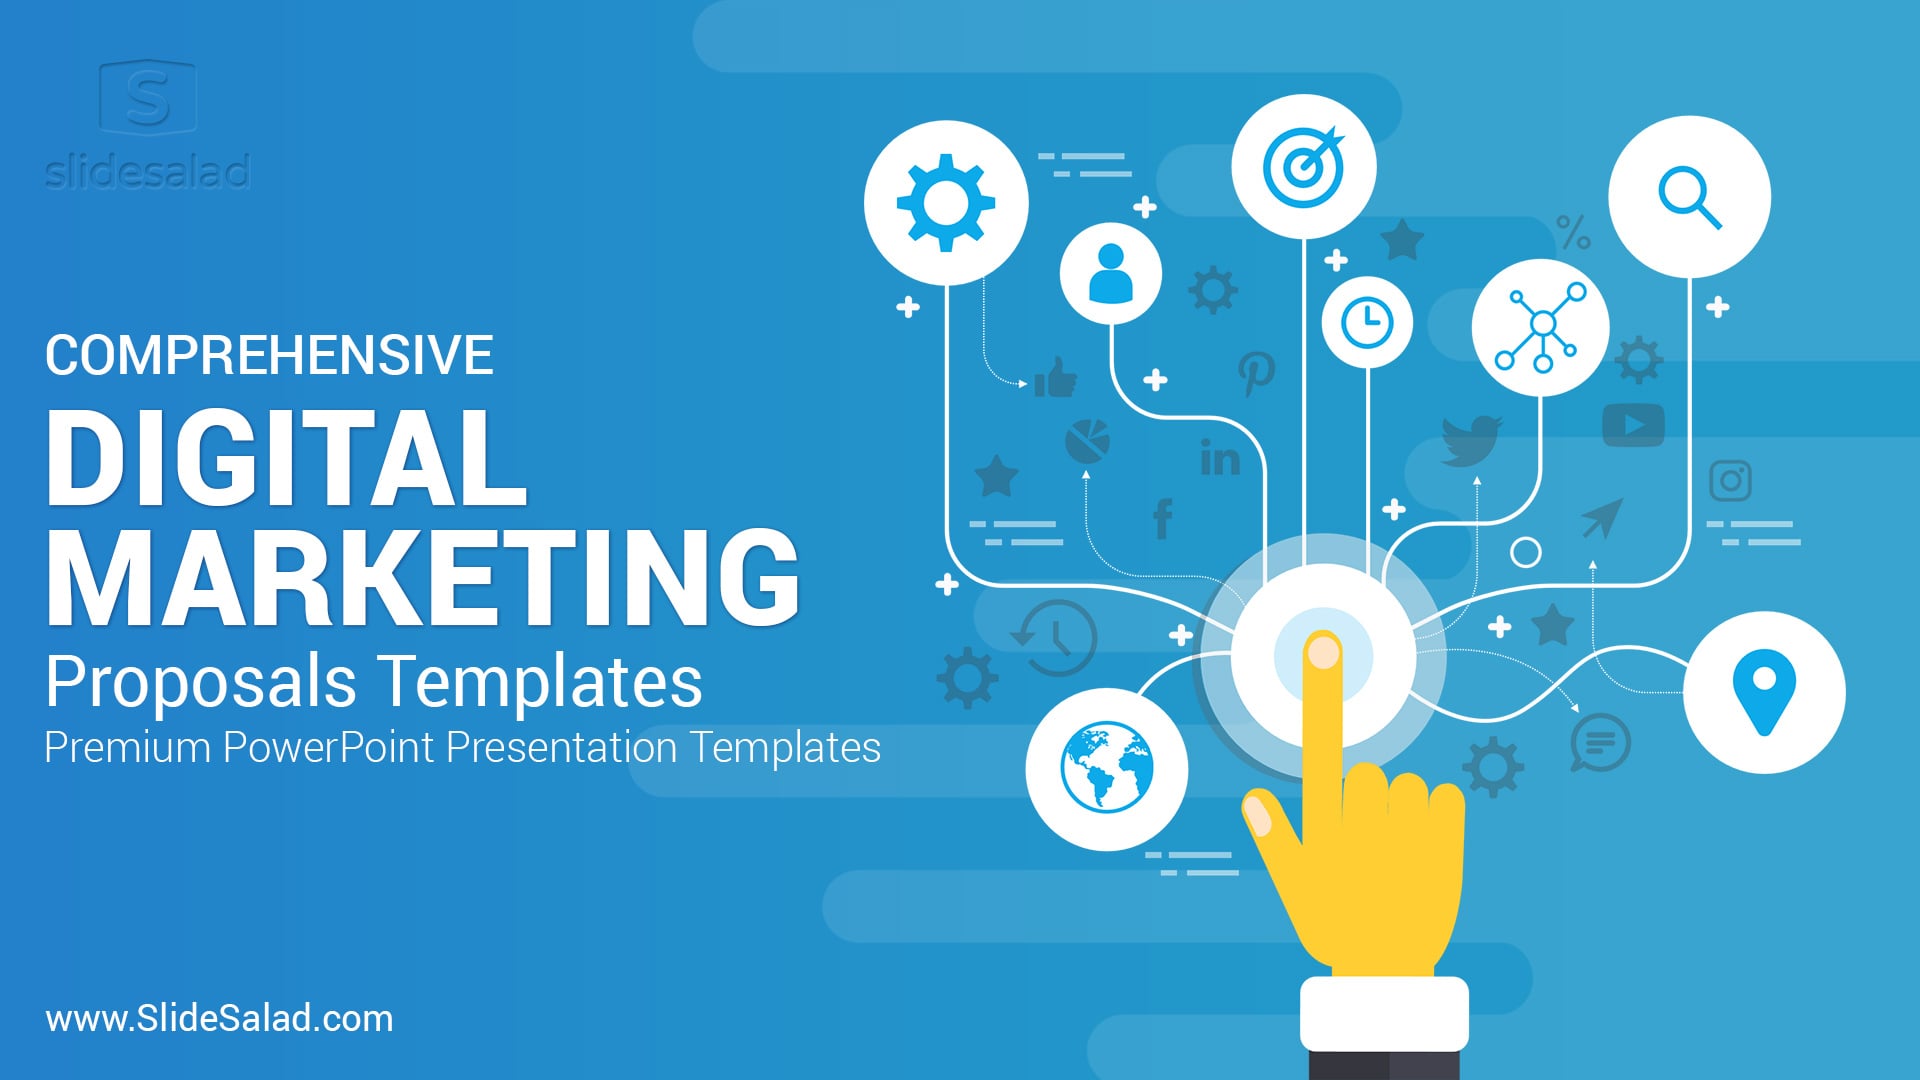 Digital-Marketing-Proposals-PowerPoint-Templates-For-Presentations